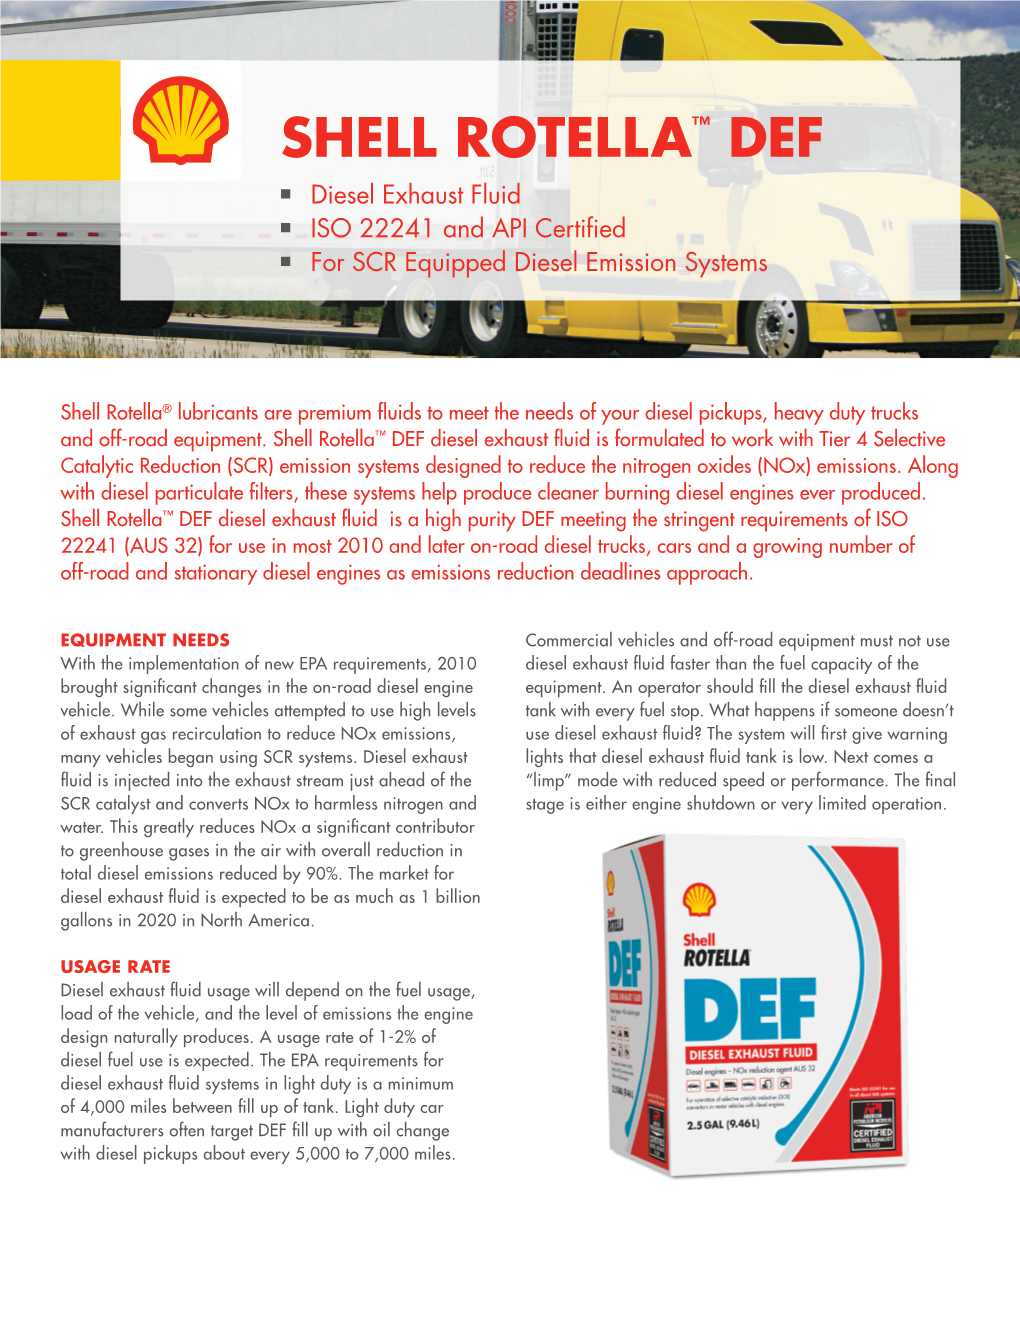 Download the Shell Rotella® DEF Diesel Exhaust Fluid Brochure